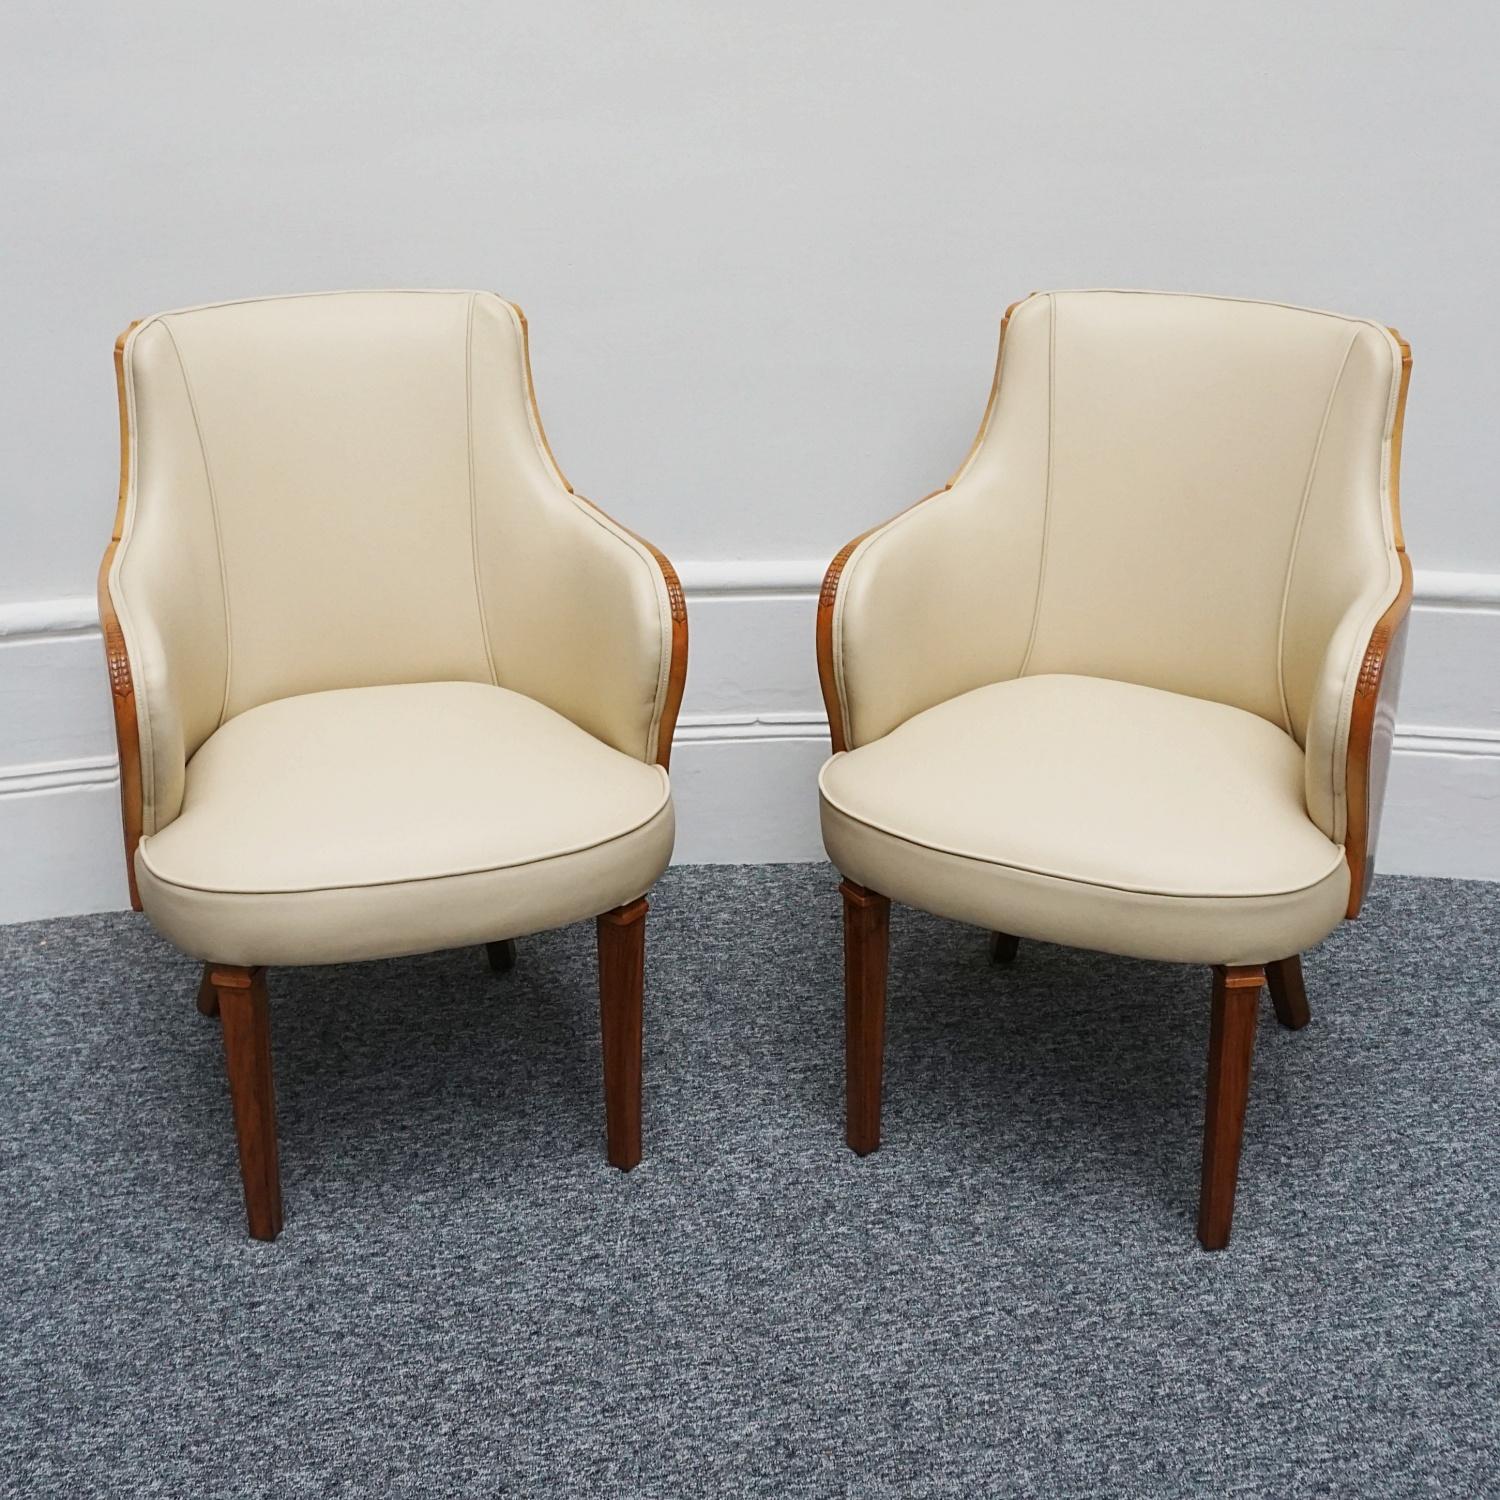 A Pair of Art Deco Armchairs by Maurice Adams. Burr walnut wrap around veneers with carved detail to arms. Solid walnut legs and frame. Re-upholstered in cream leather. 

Dimensions: H 89cm W 58cm D 56cm Seat H 44cm 

Origin: English

Date: Circa